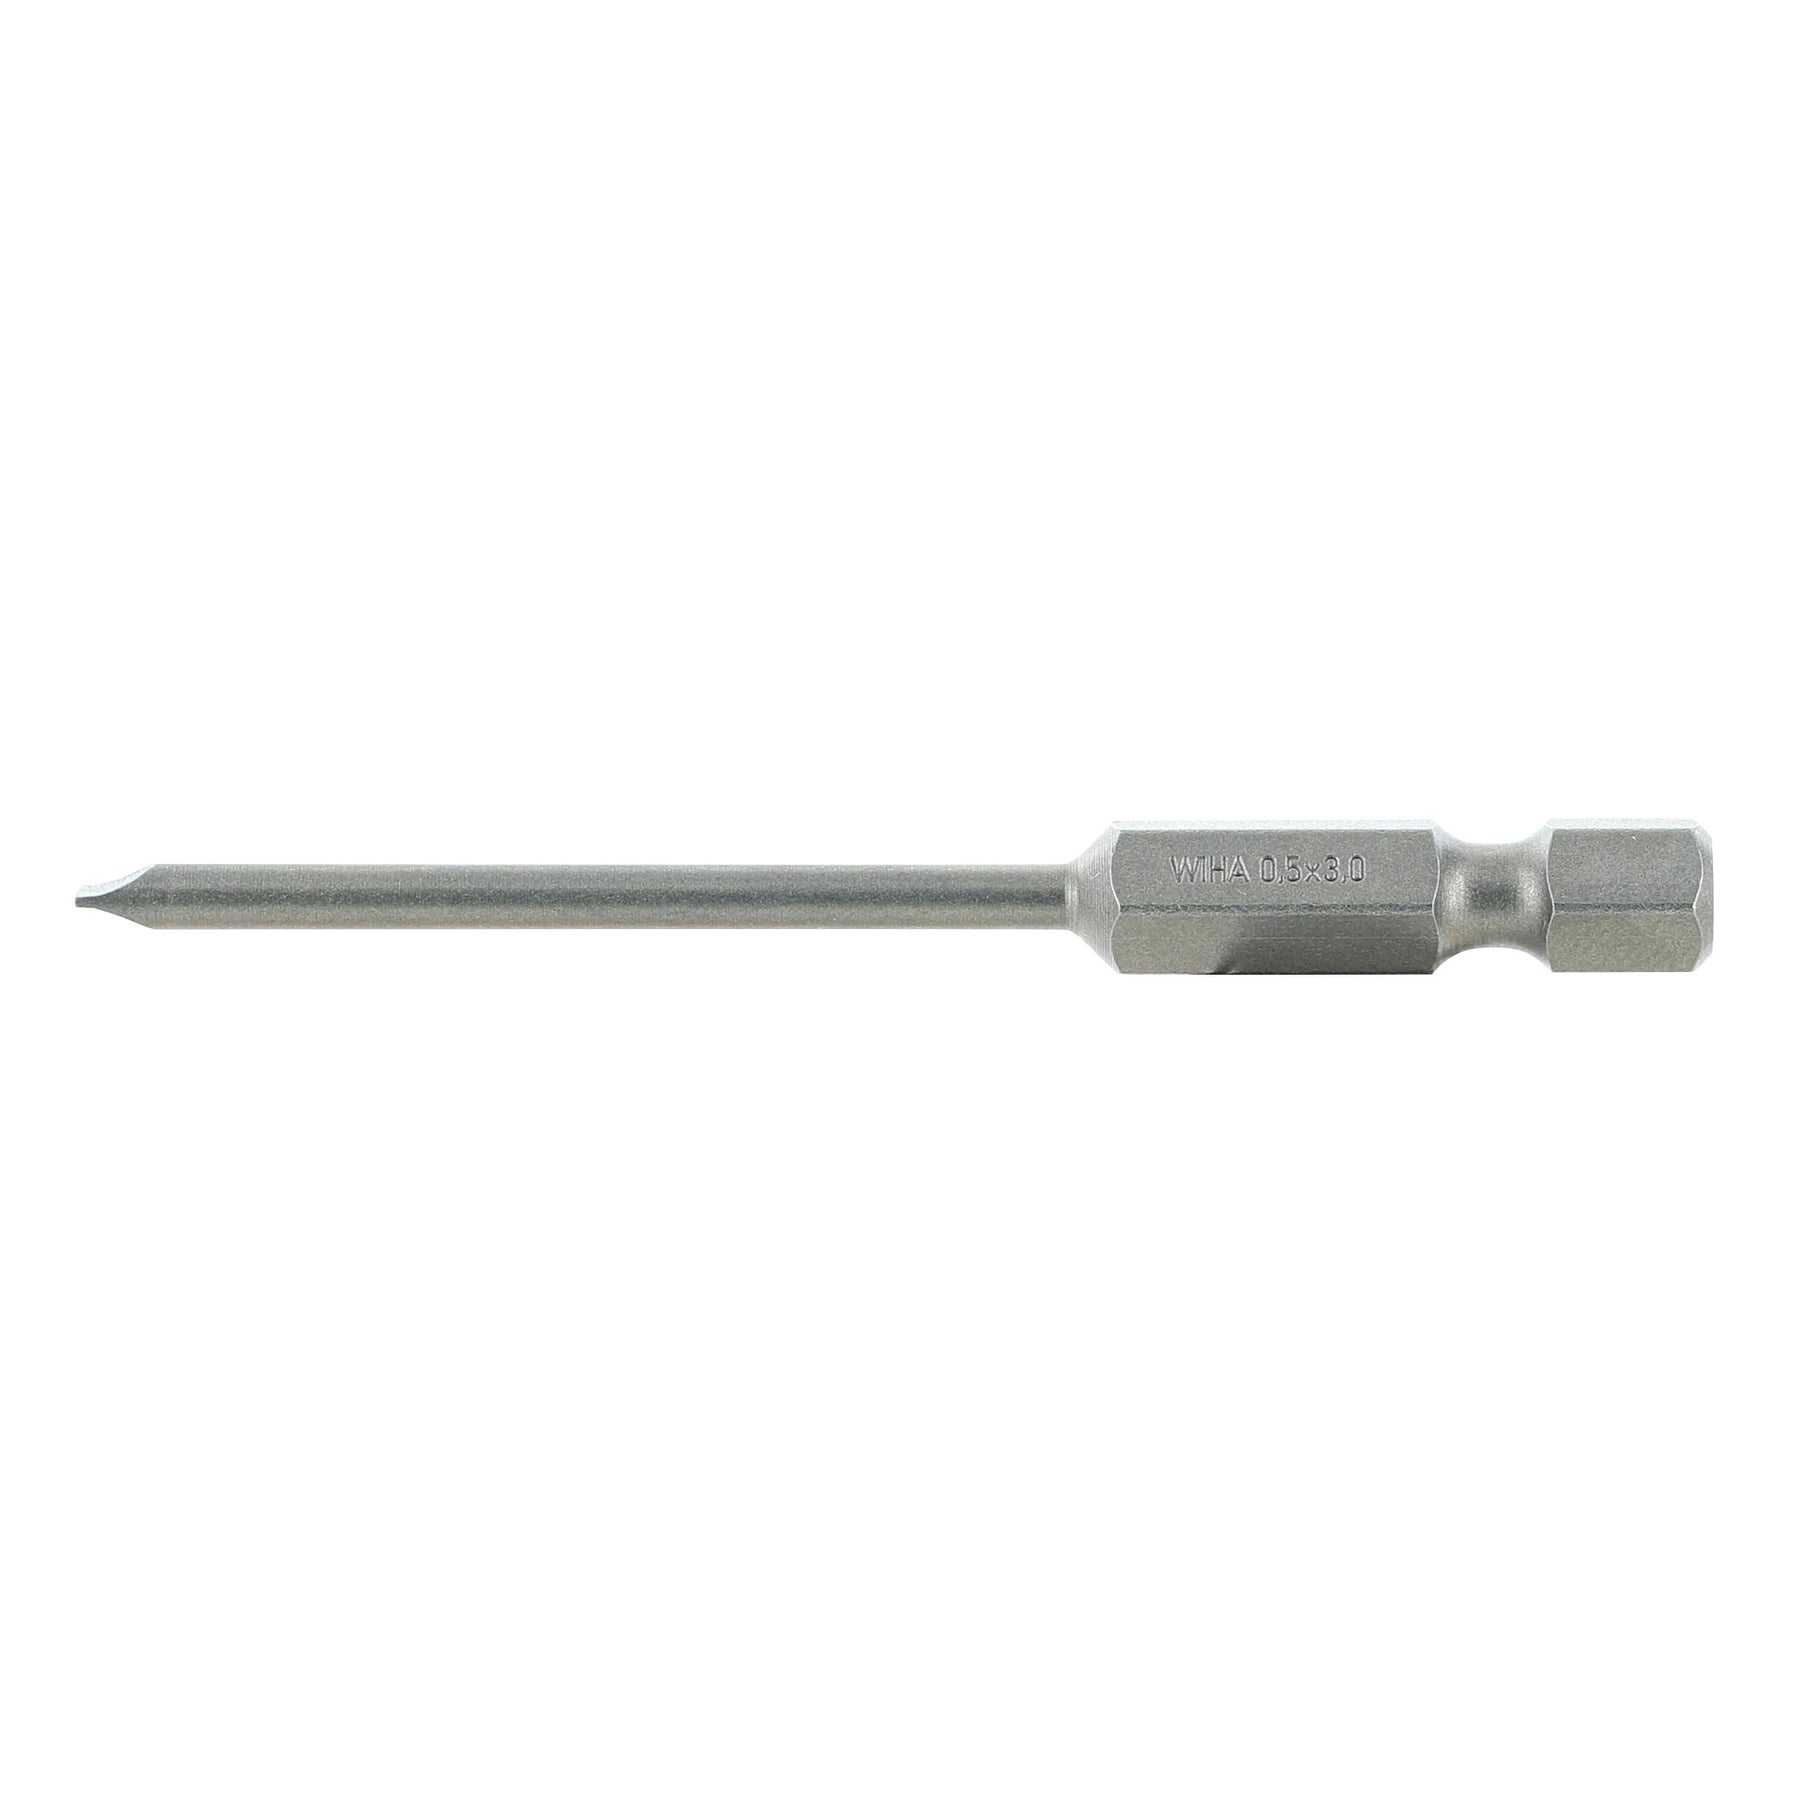 Slotted Bit 3.0 - 70mm - 10 Pack